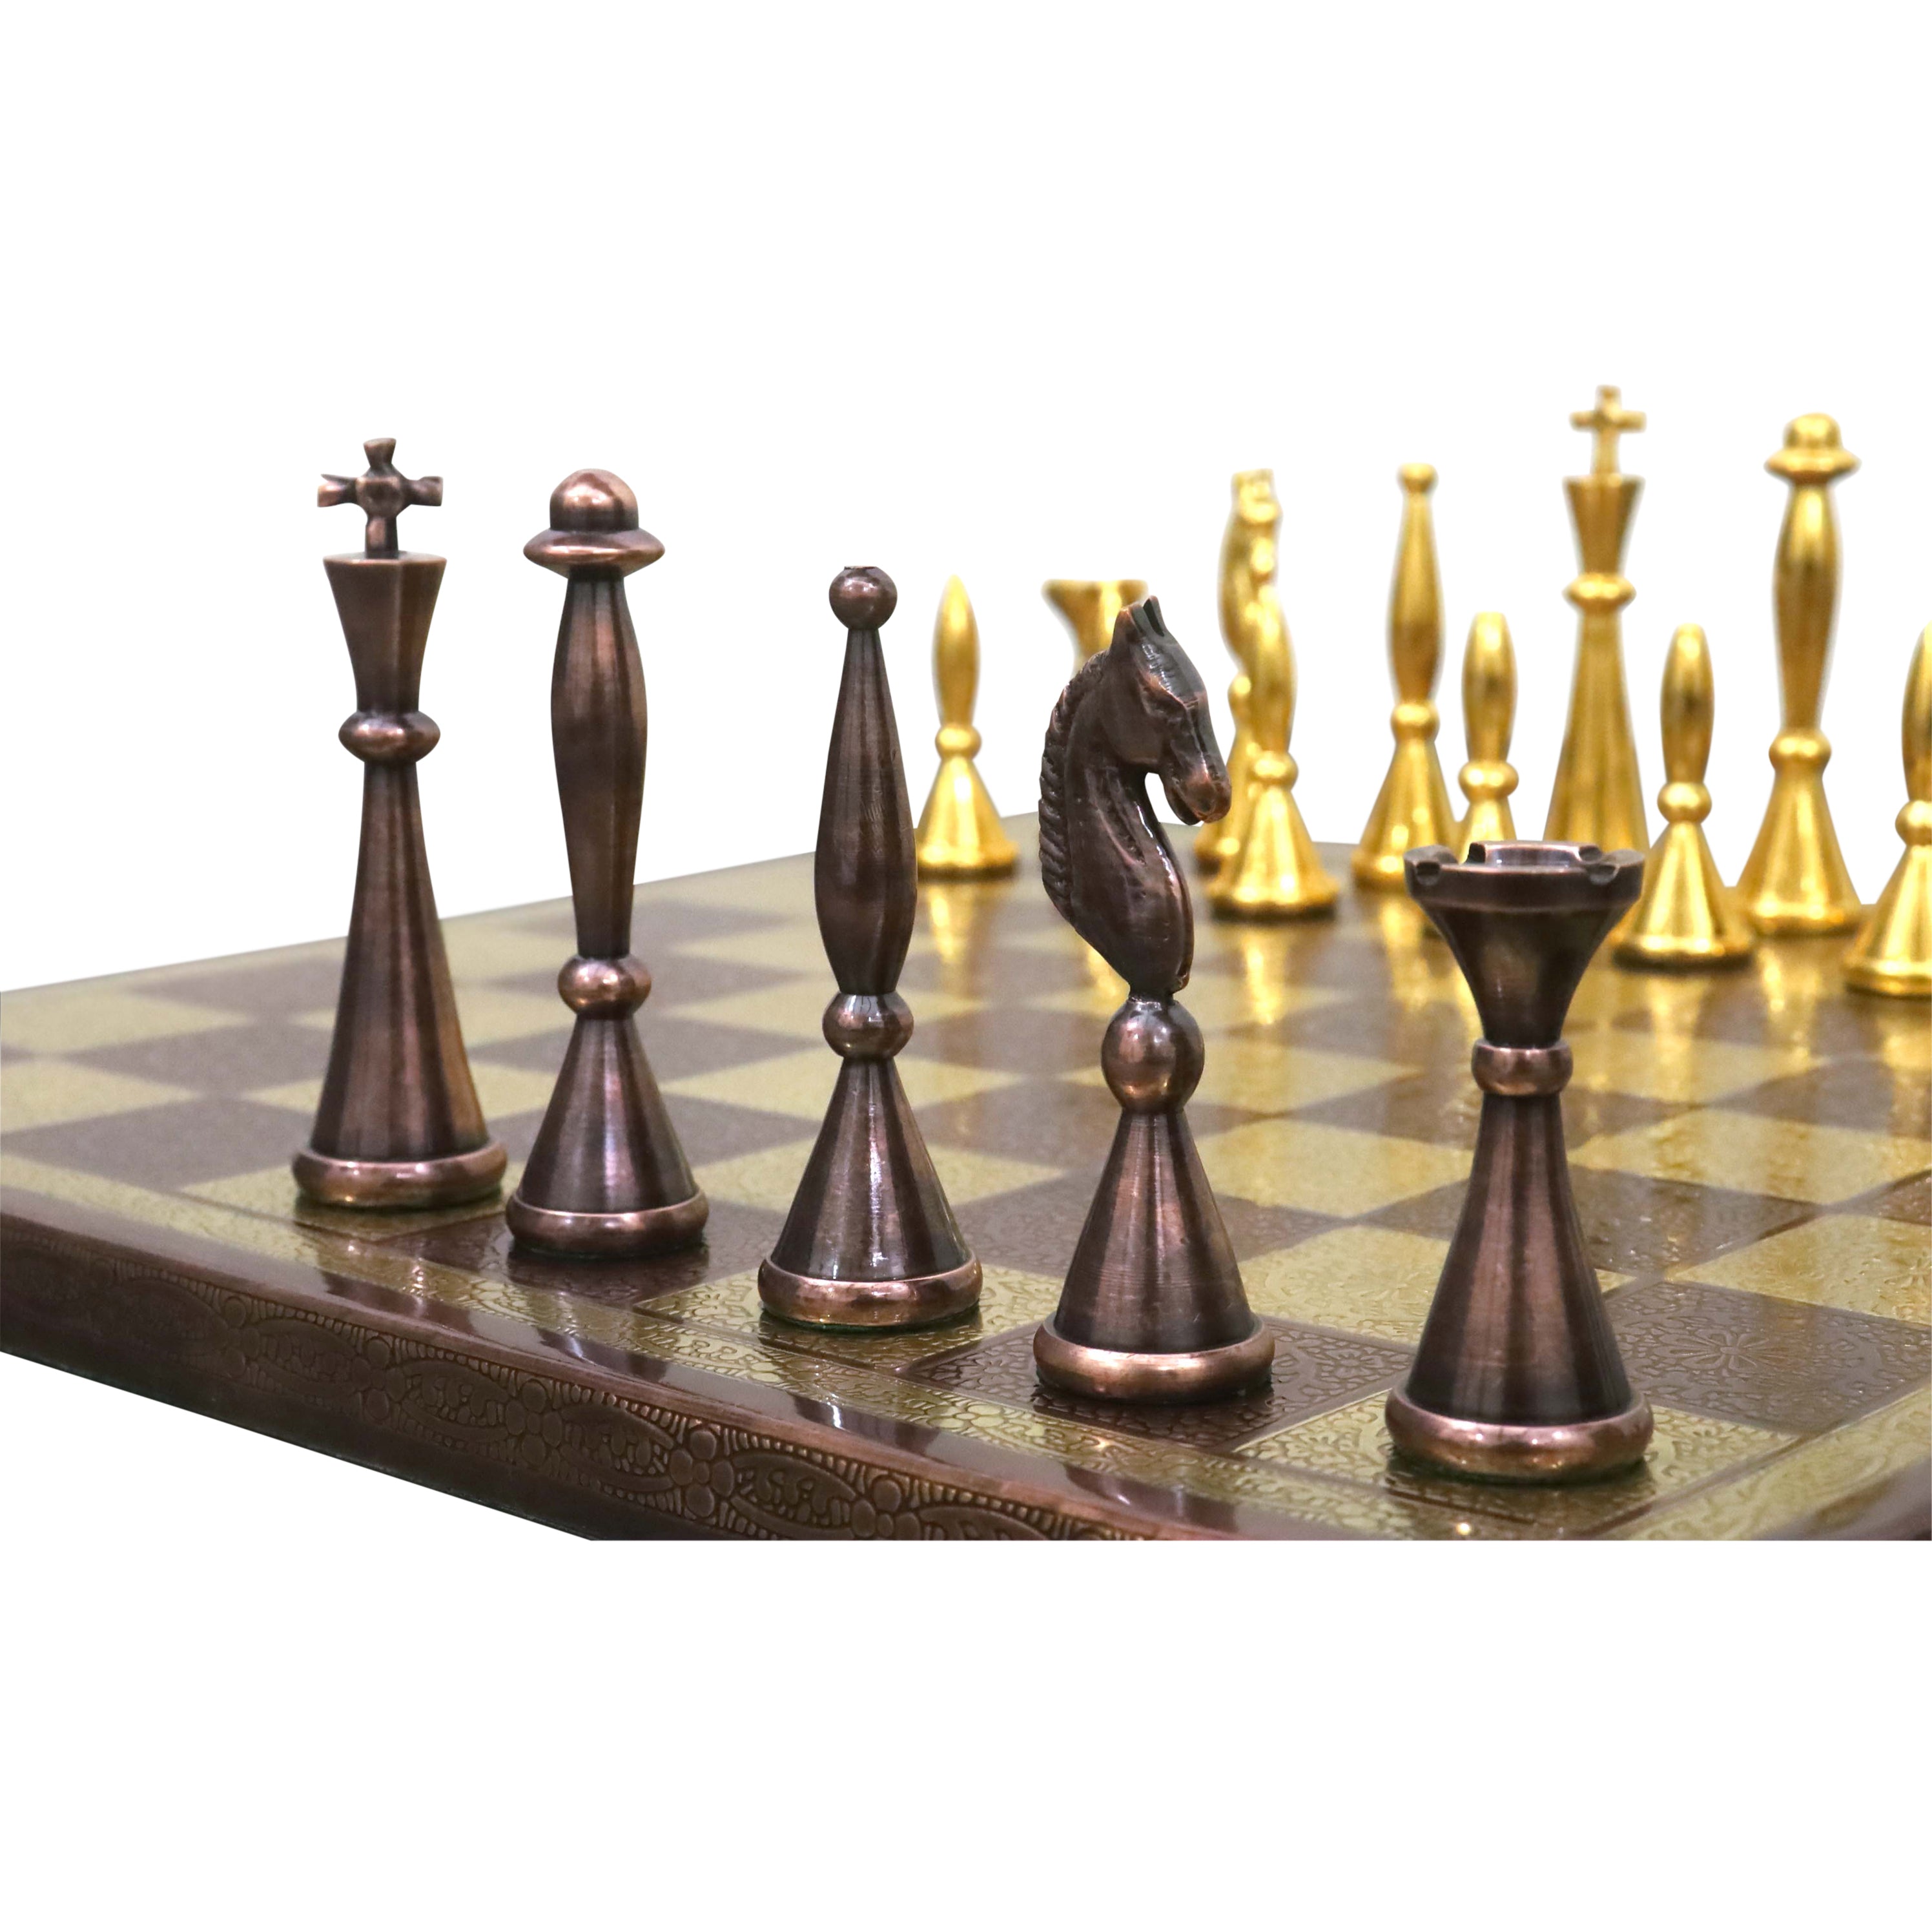 Black,Golden & Silver Brass Royal Chess Pieces Set with Board